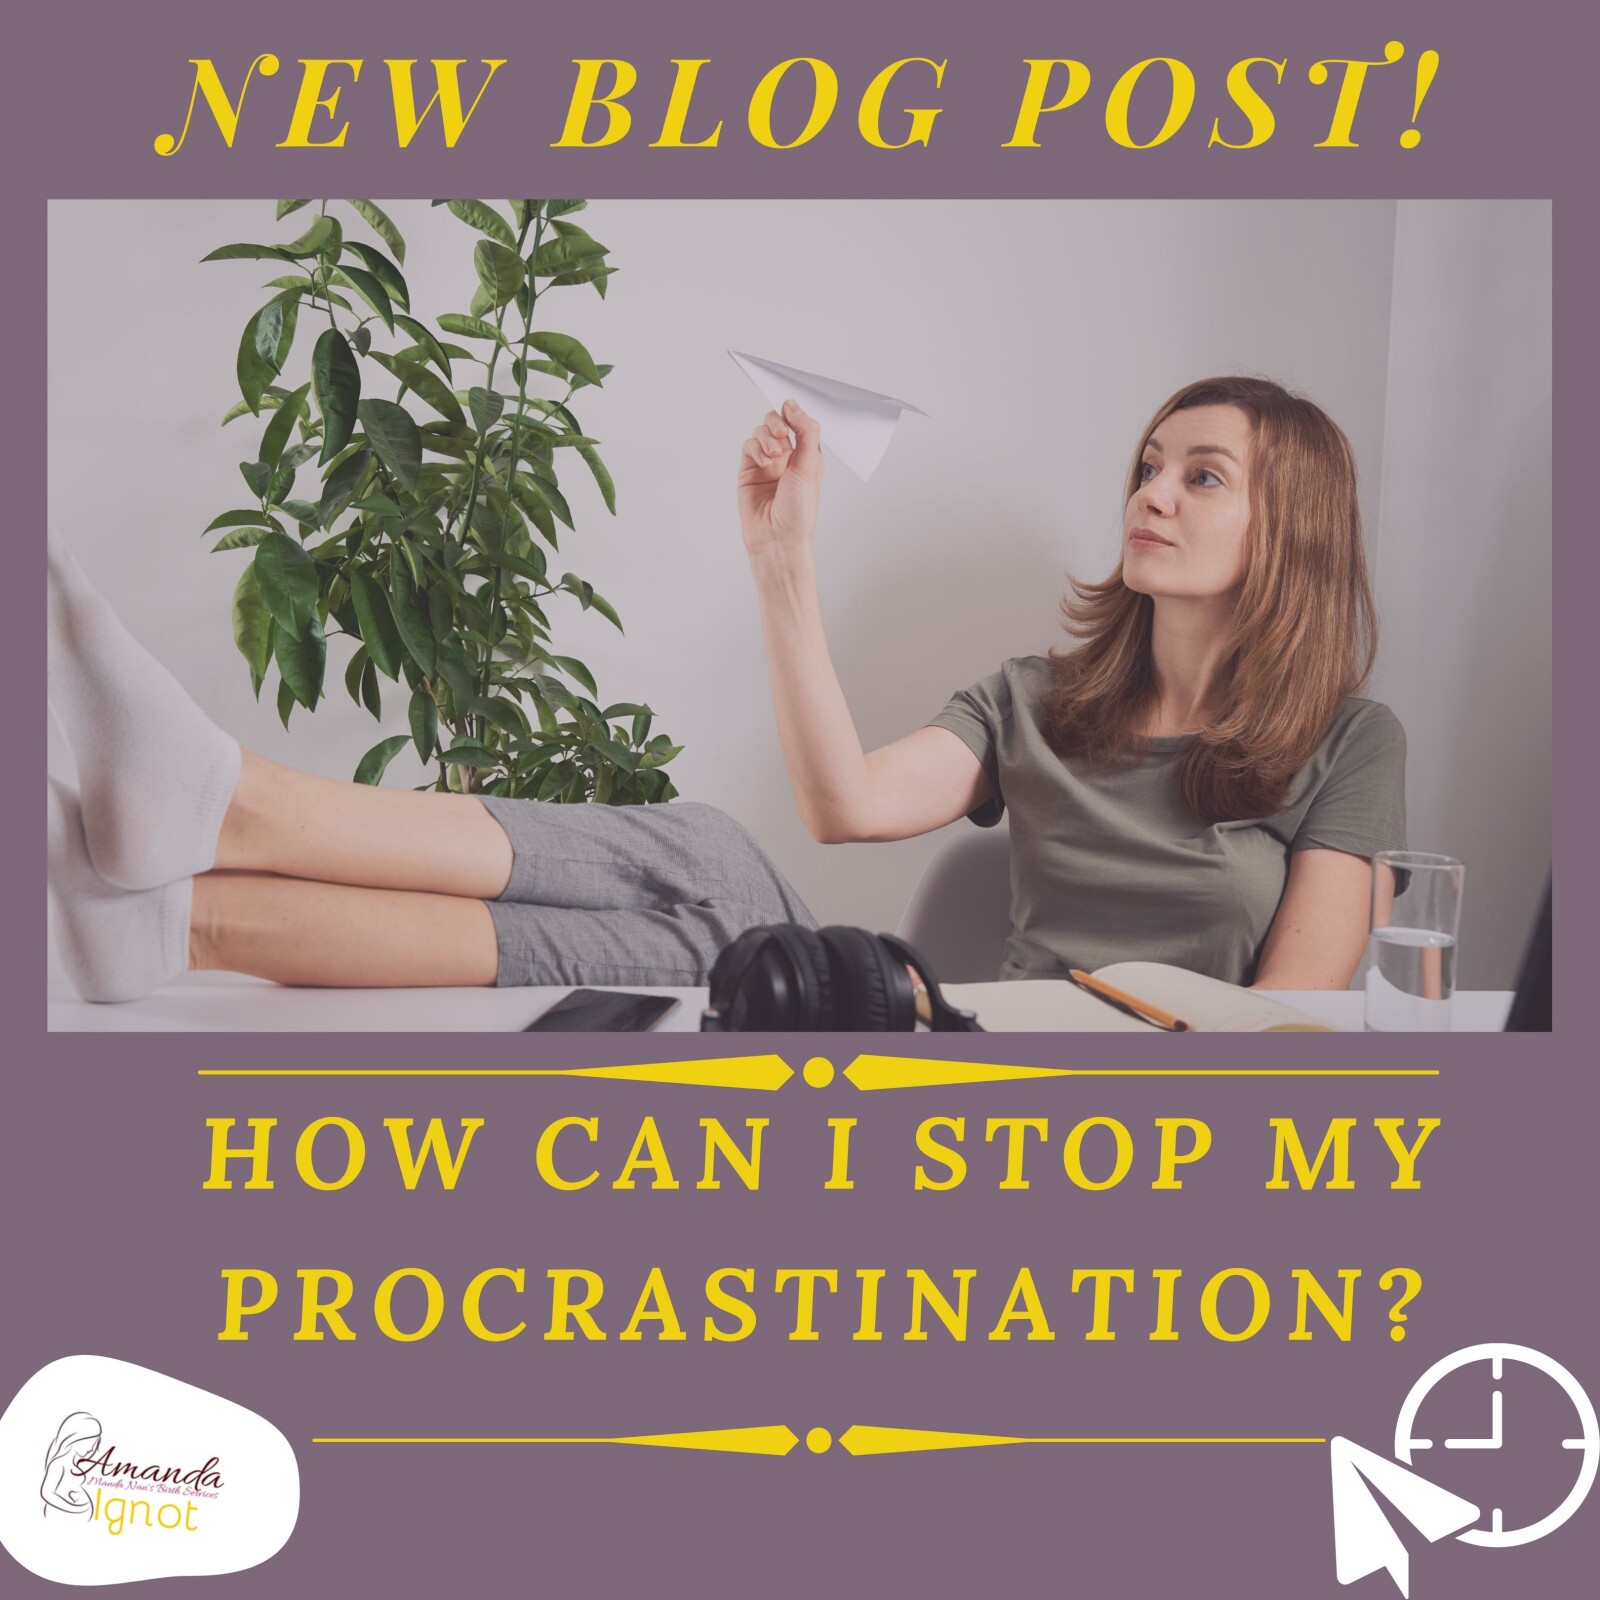 How Can I Stop My Procrastination?